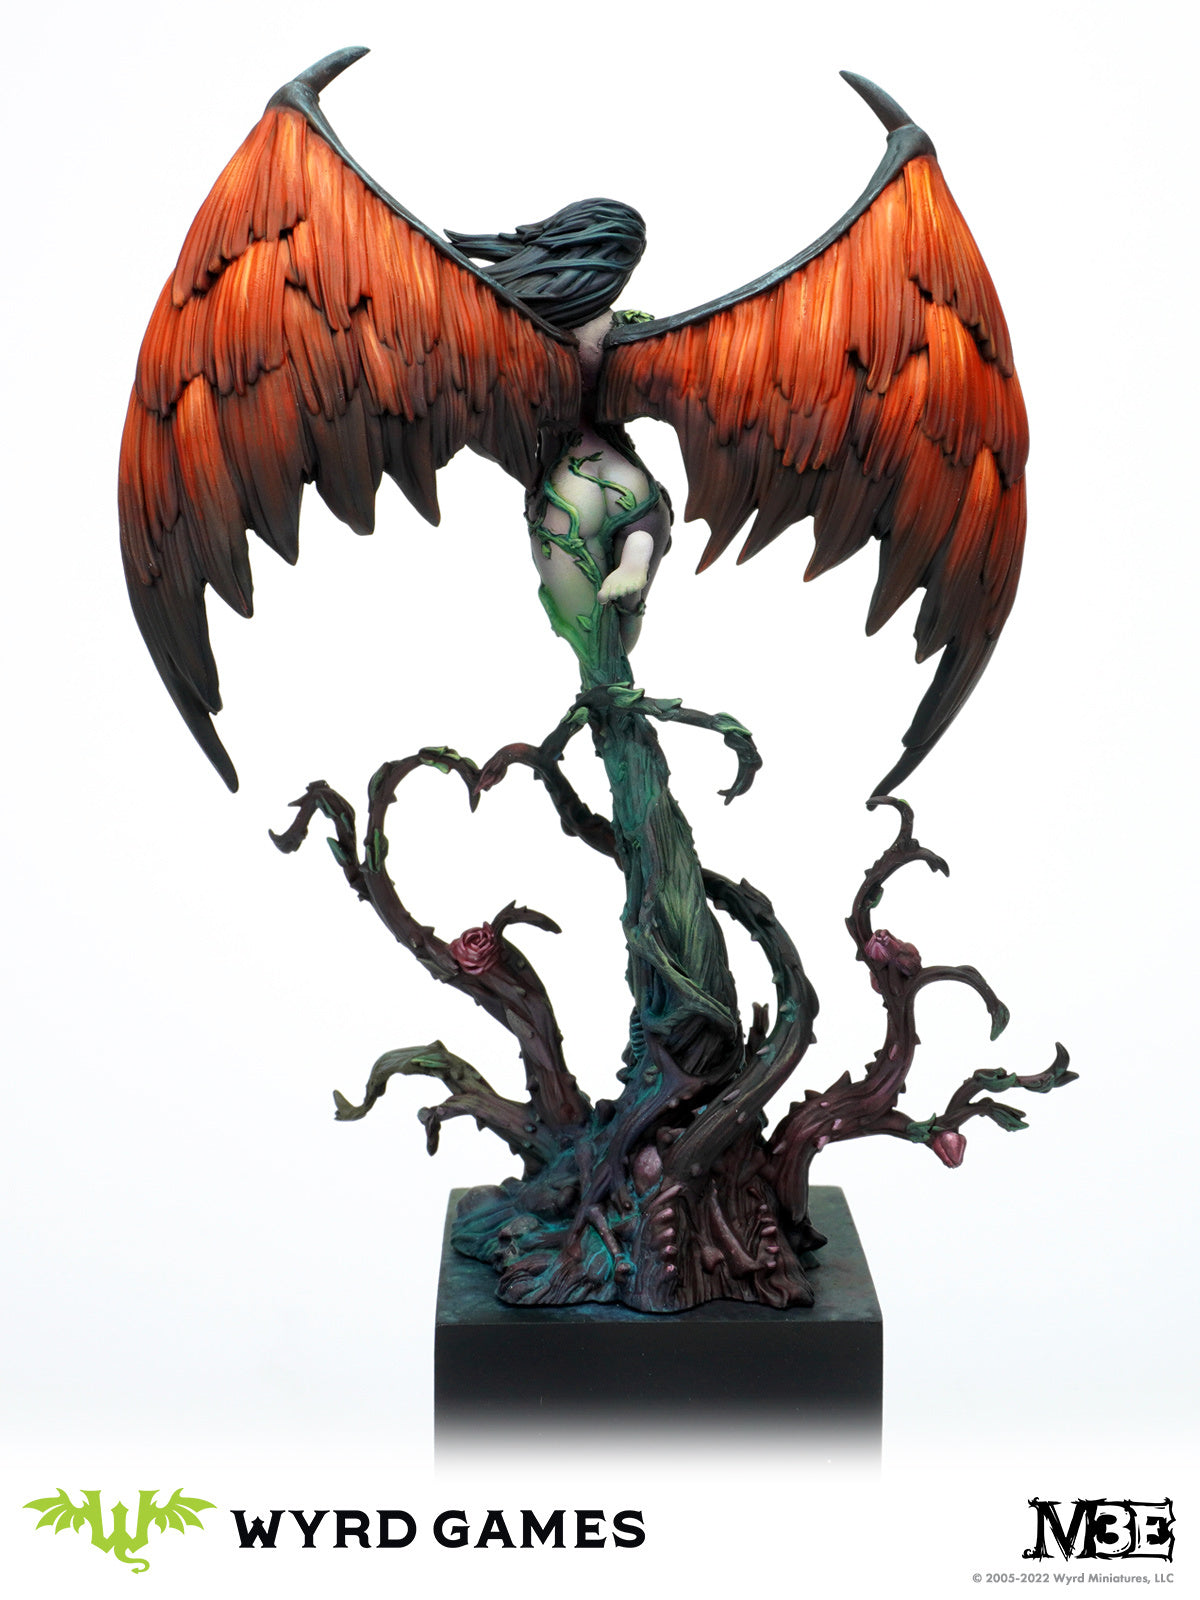 
                  
                    Iconic - The Fae Queen - Wyrd Miniatures - Online Store
                  
                